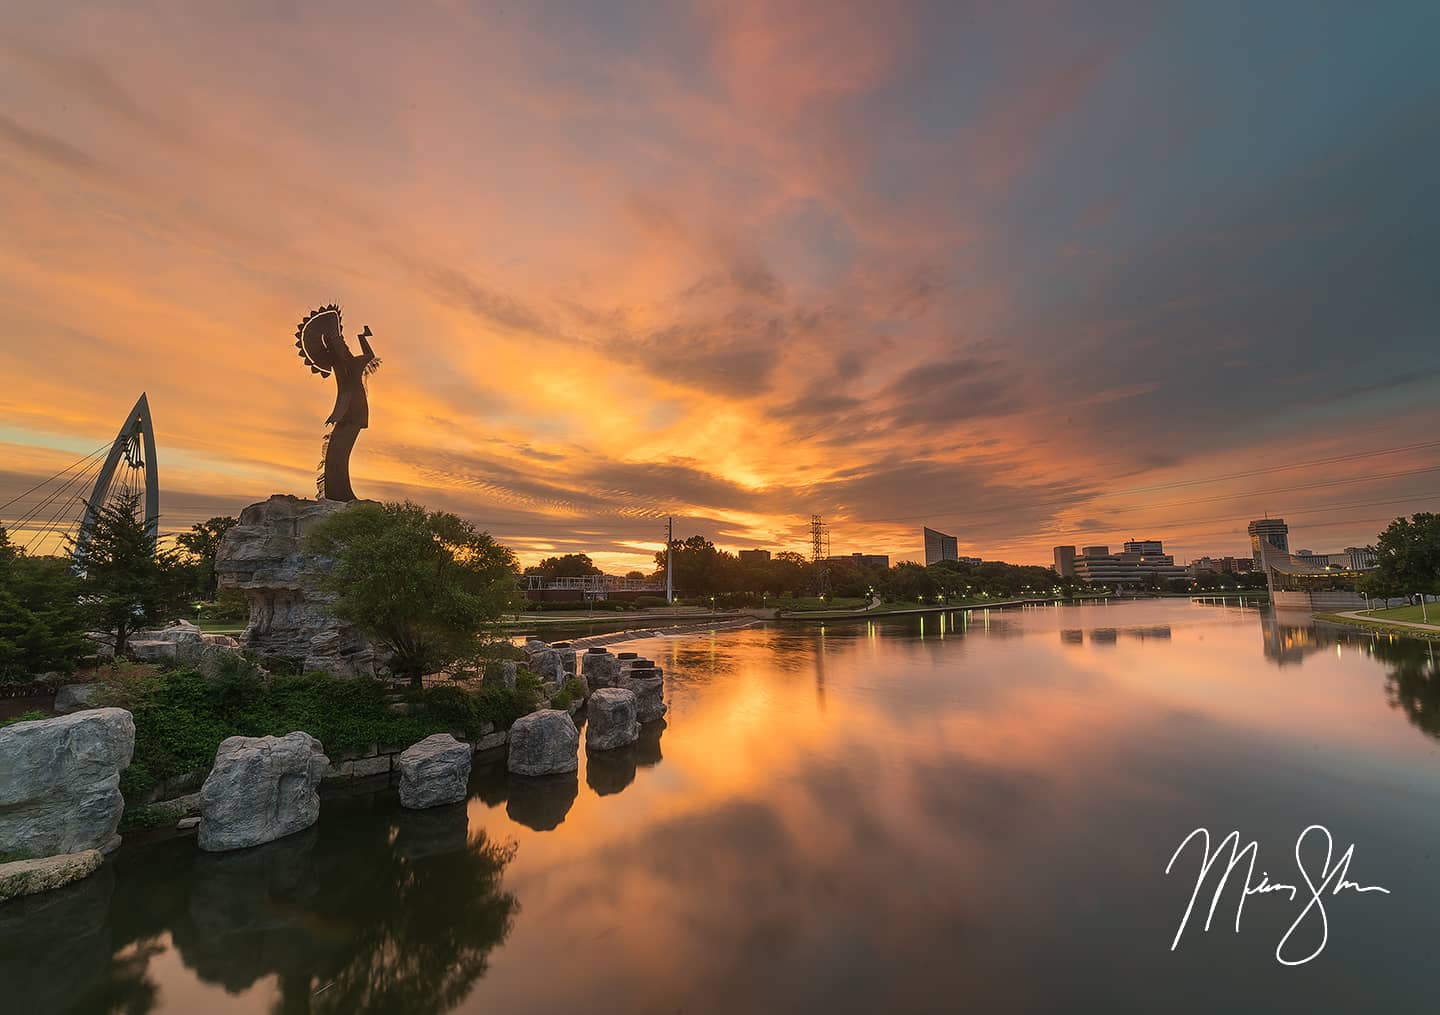 Sunrise Fire at the Keeper of the Plains - Keeper of the Plains, Wichita, Kansas